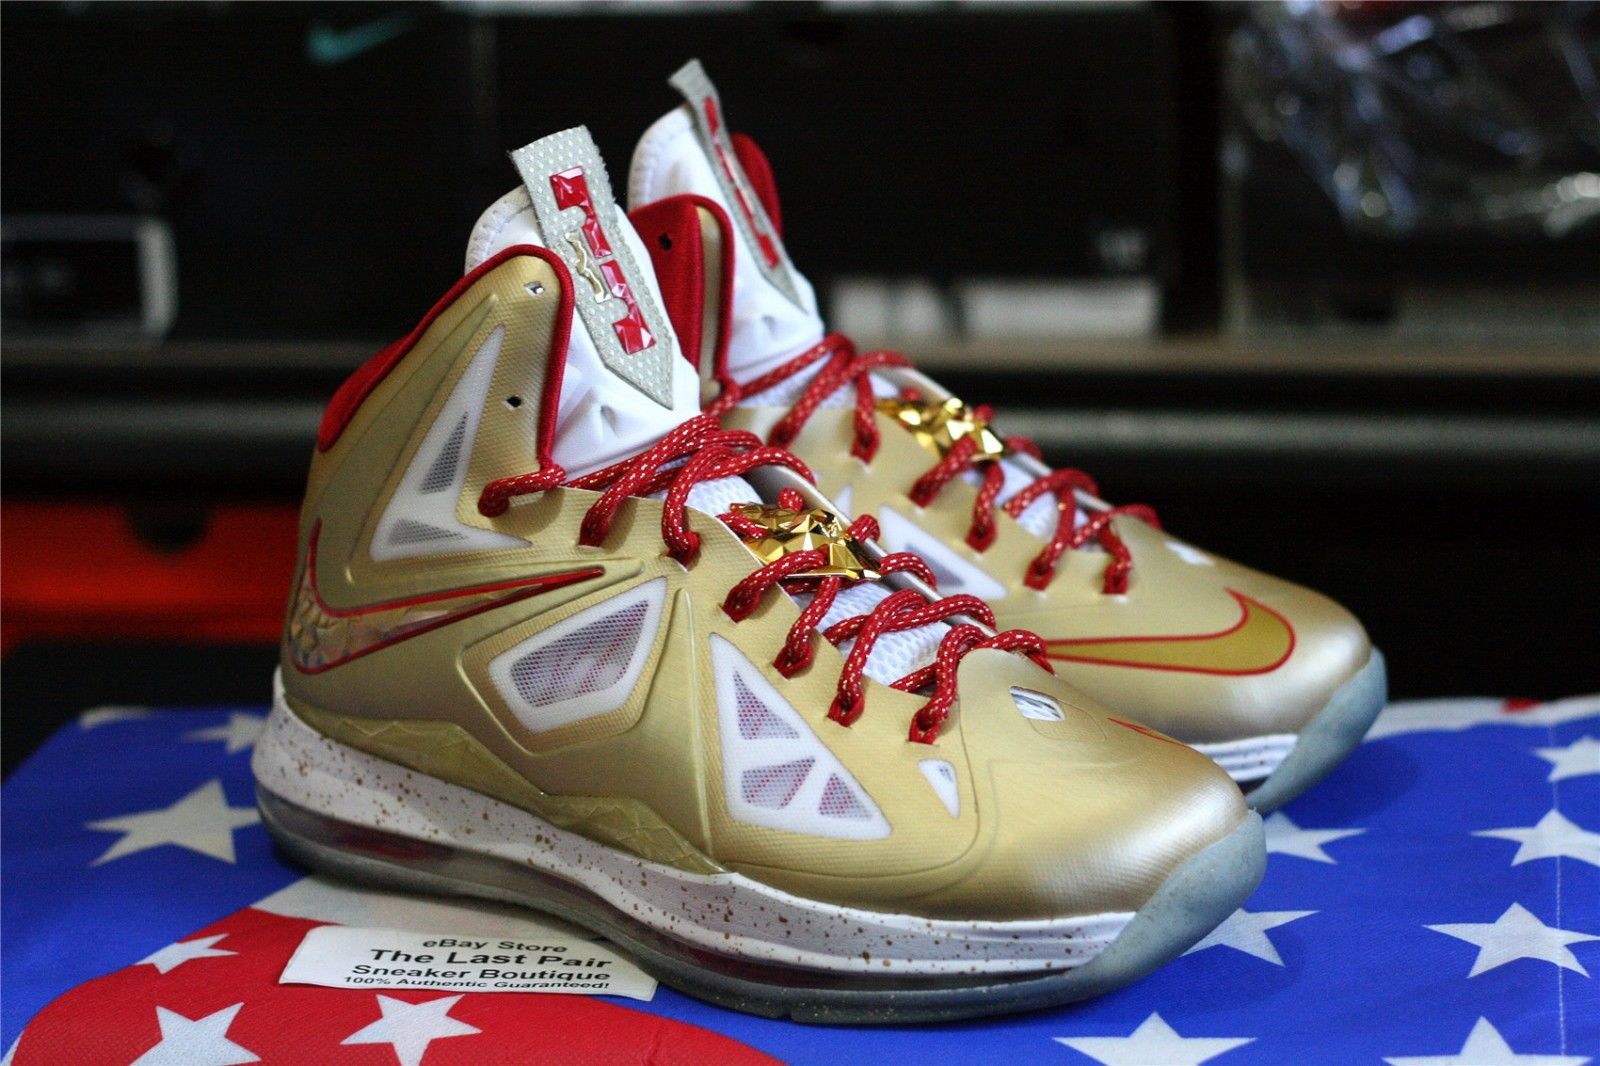 Nike LeBron 10 &quot;Ring Ceremony&quot; Sample (2012)